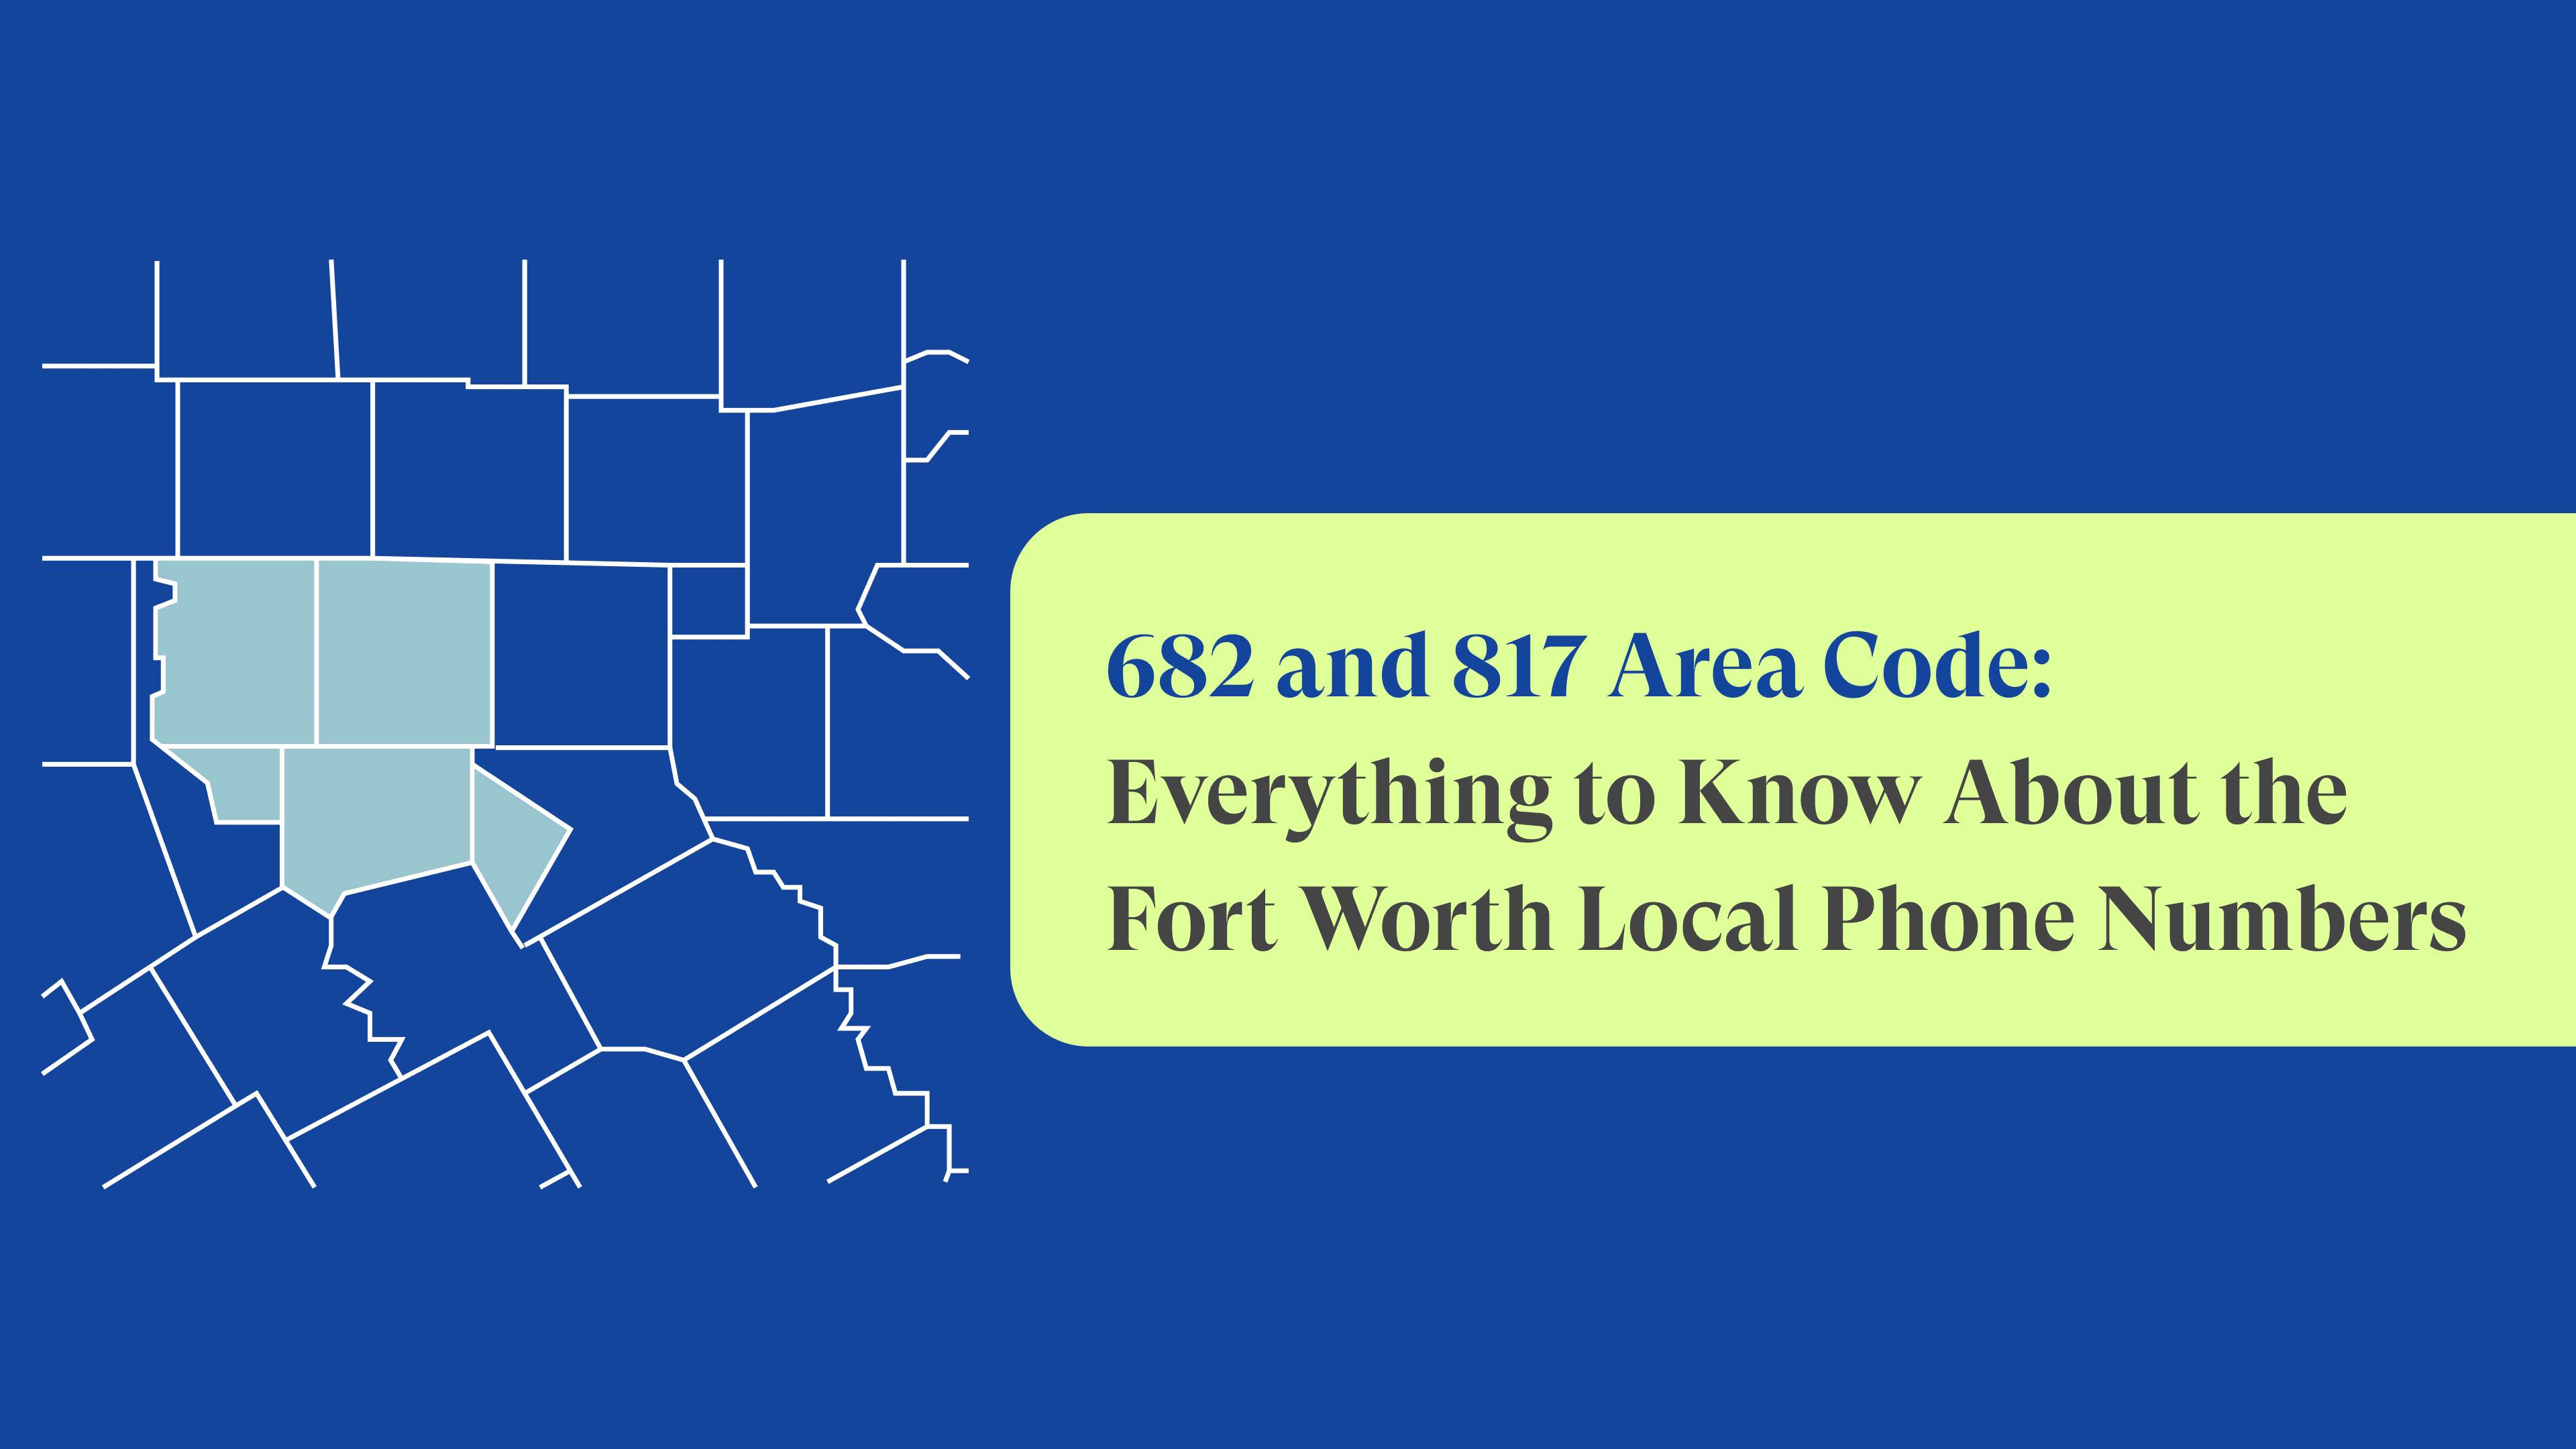 Area Codes 682 and 817: Fort Worth, Texas Local Phone Numbers